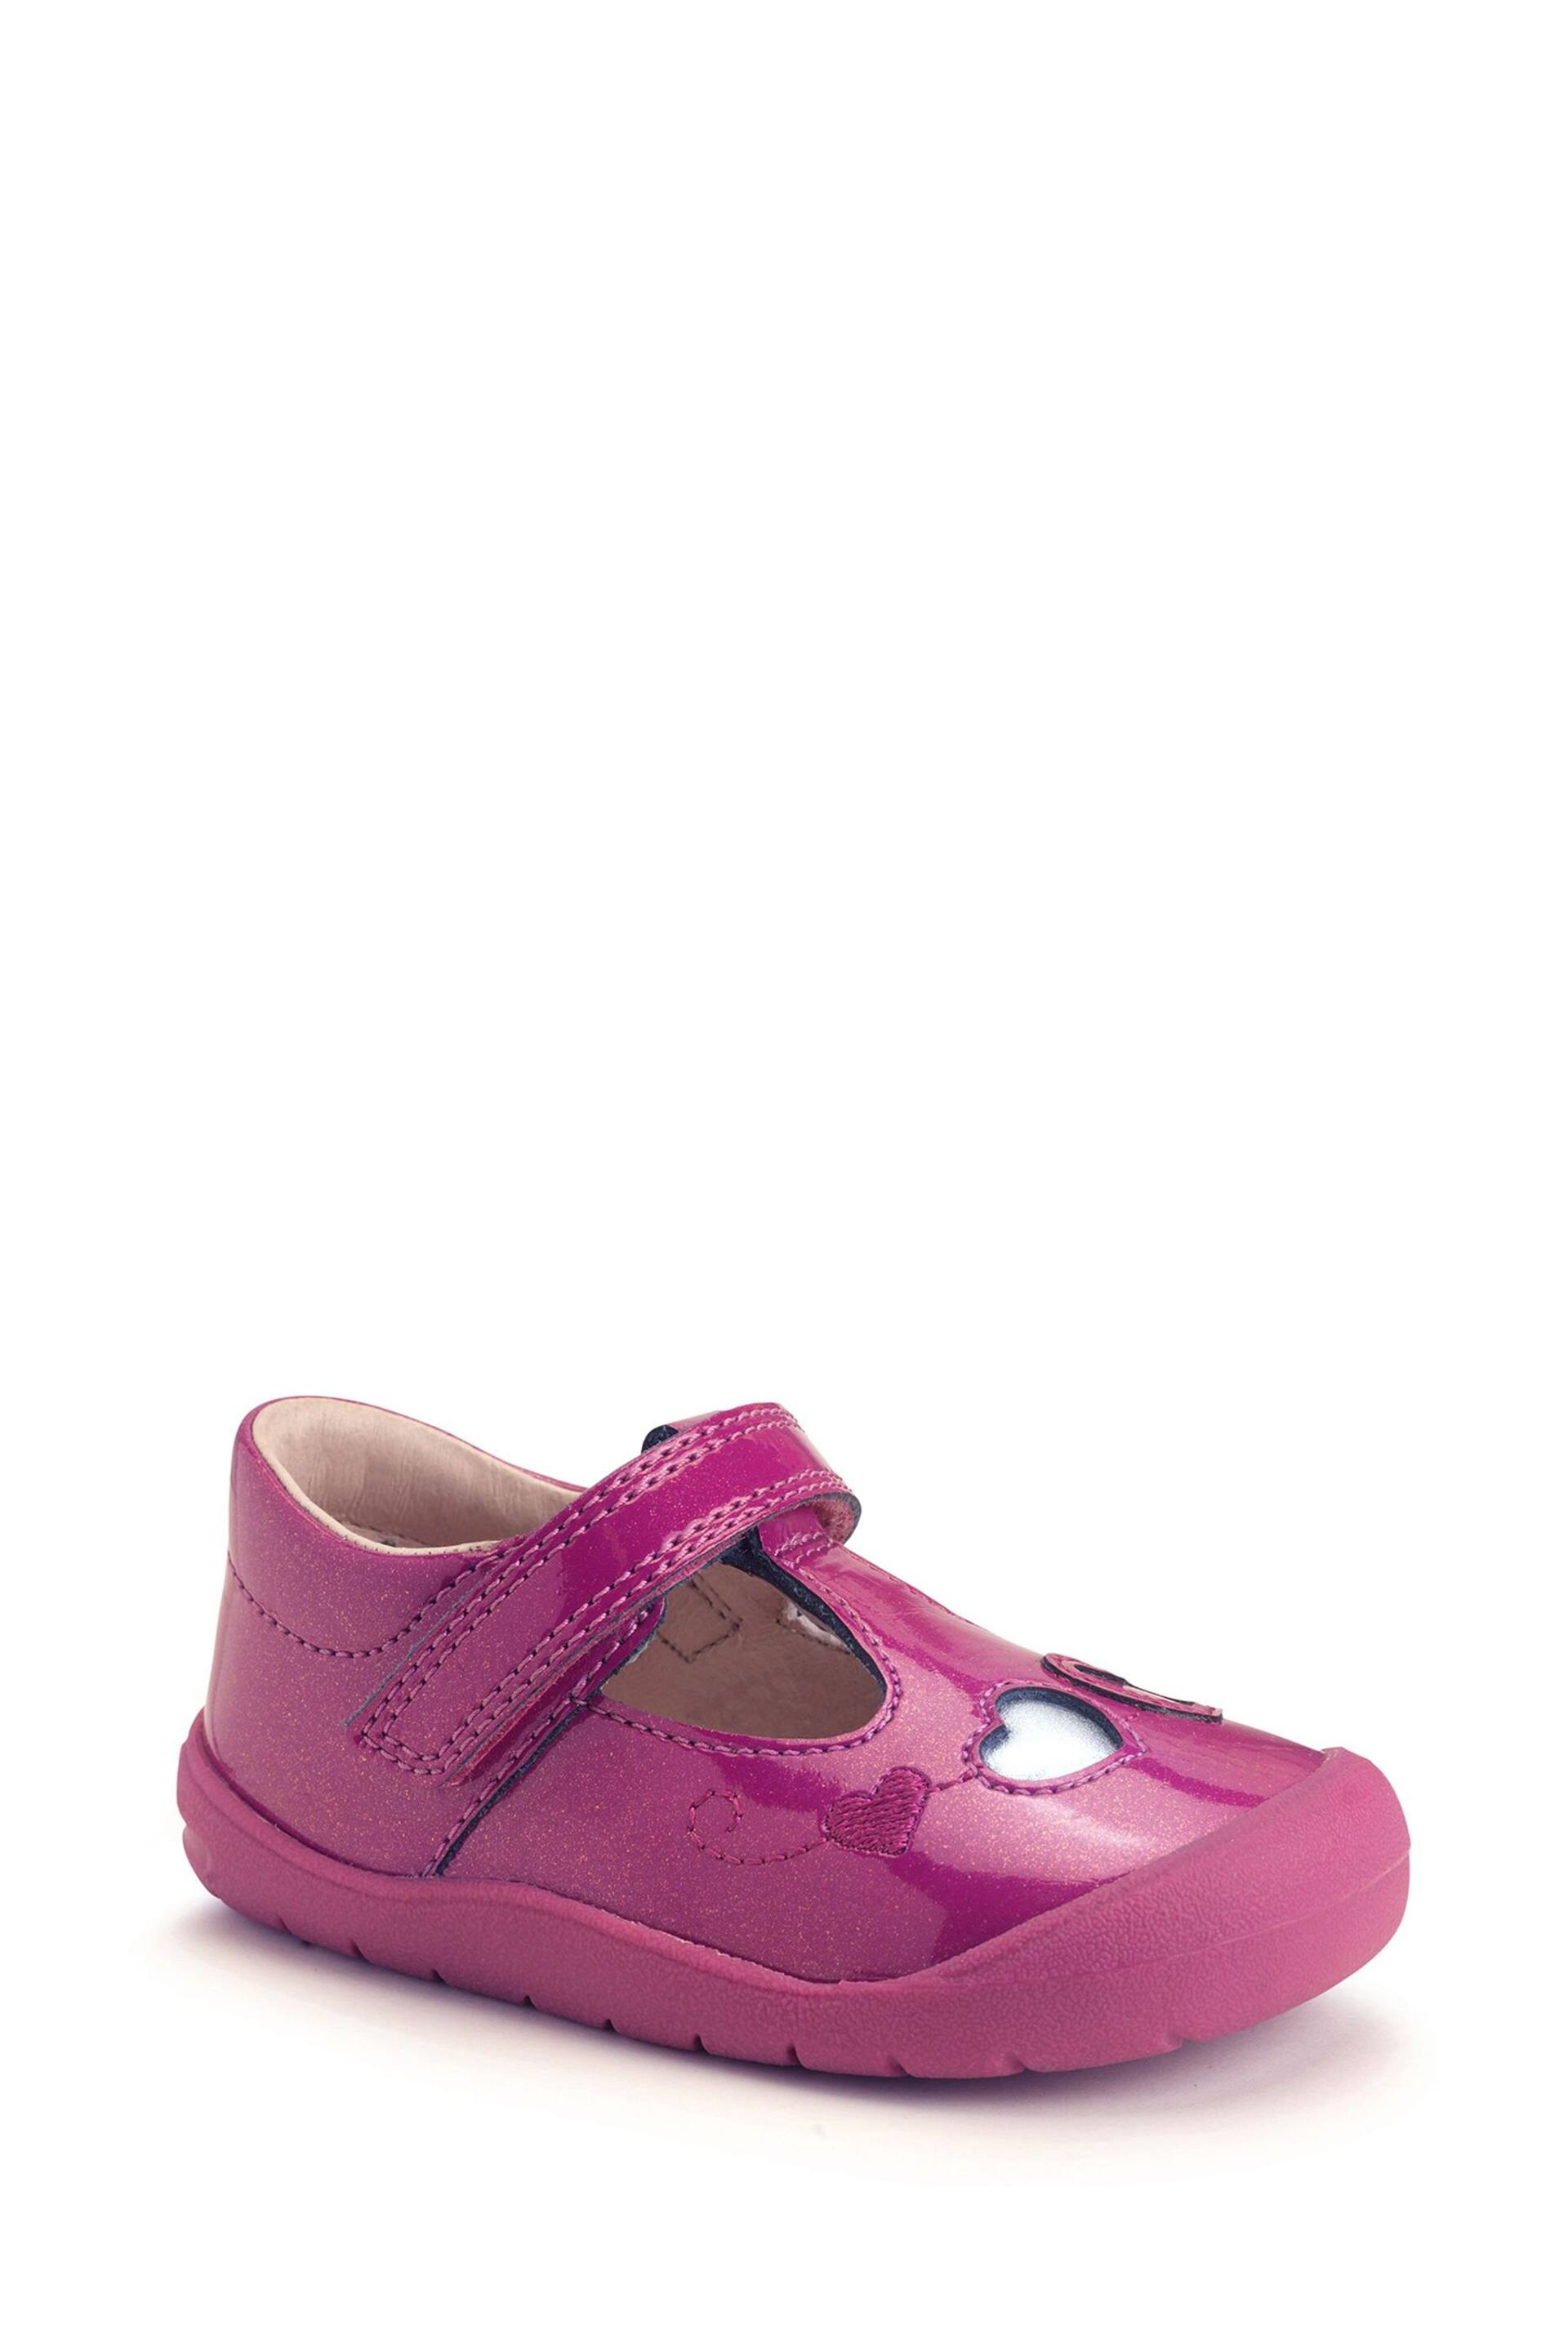 Start Rite Purple Party Berry Glitter Patent Leather T-Bar Toddler Shoes - Image 3 of 6